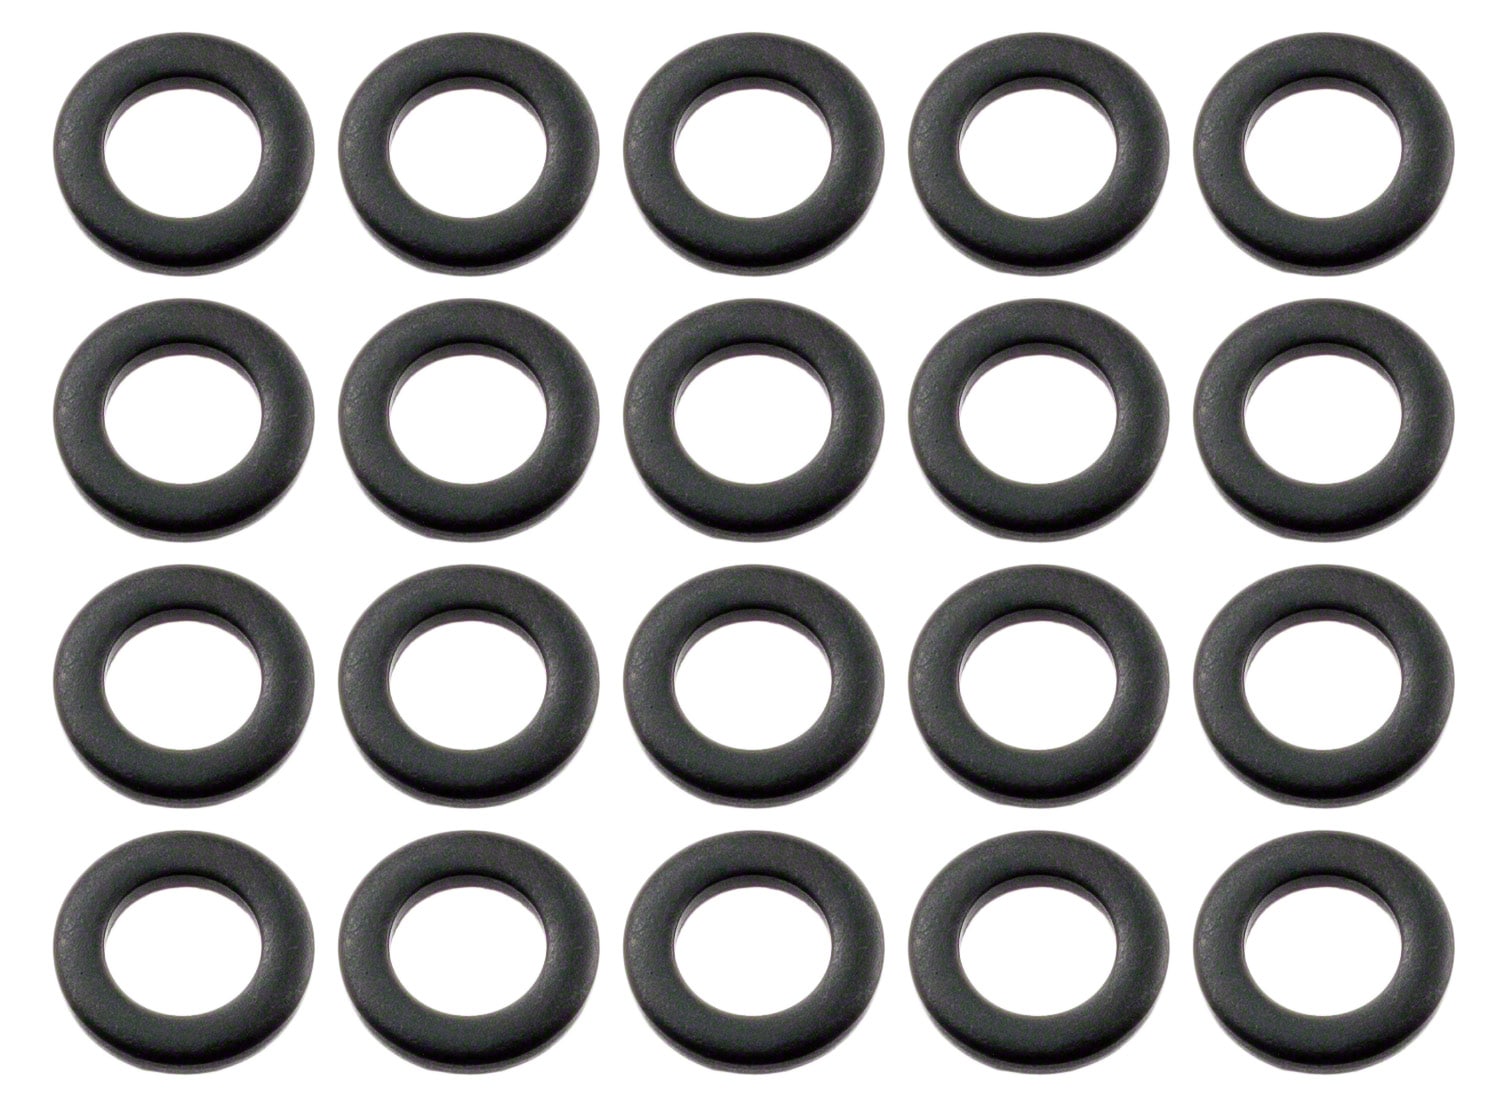 SPAREDRUM SW-BK - STEEL WASHER FOR TENSION RODS - BLACK (X20)